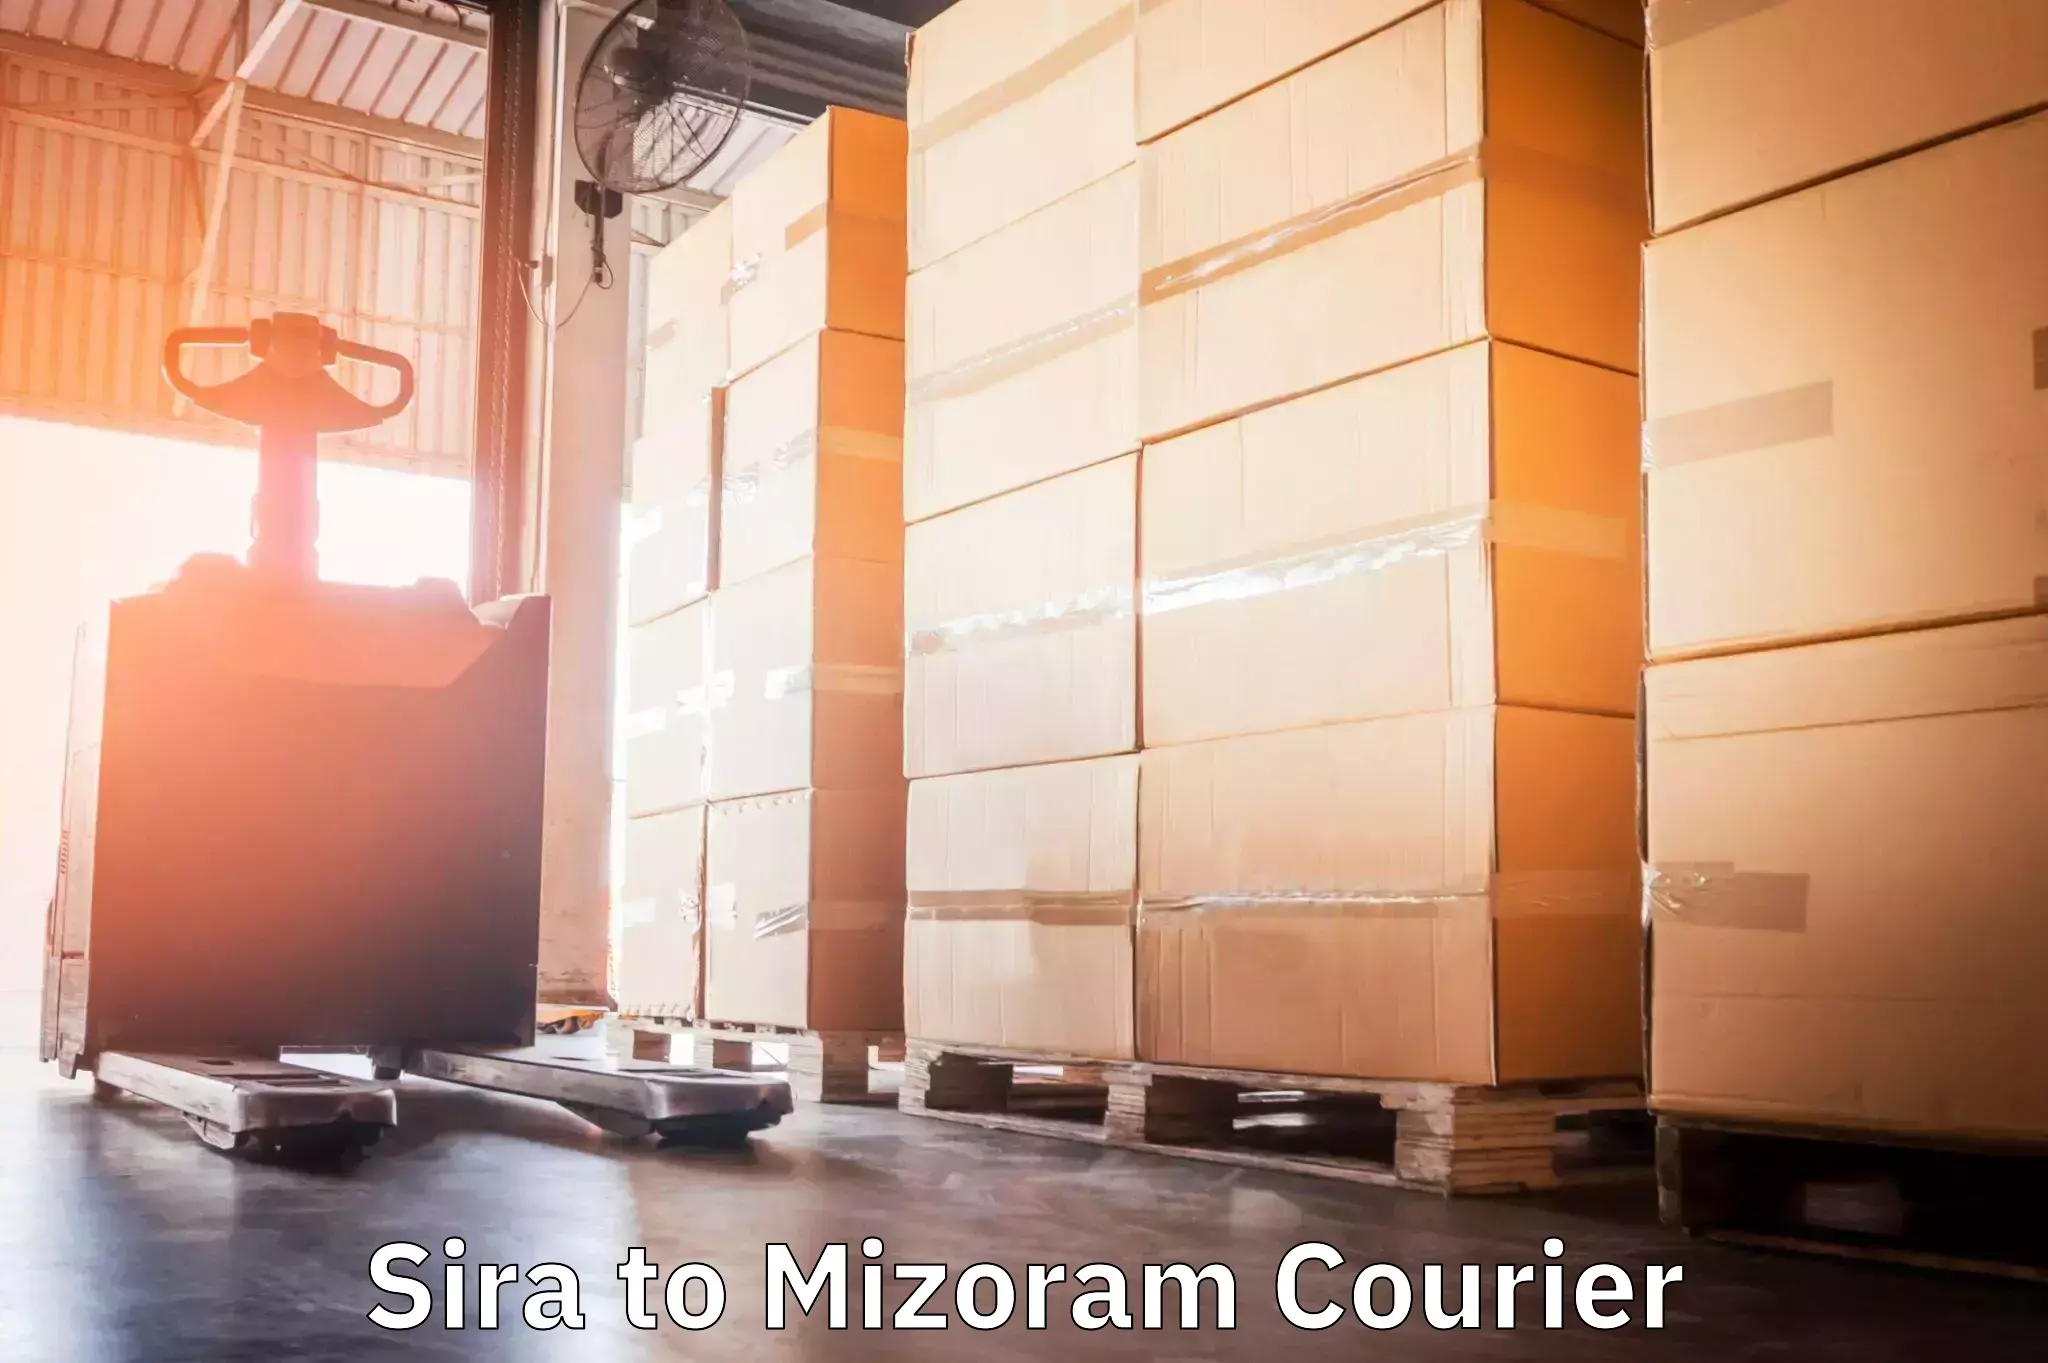 Next-day delivery options Sira to Mizoram